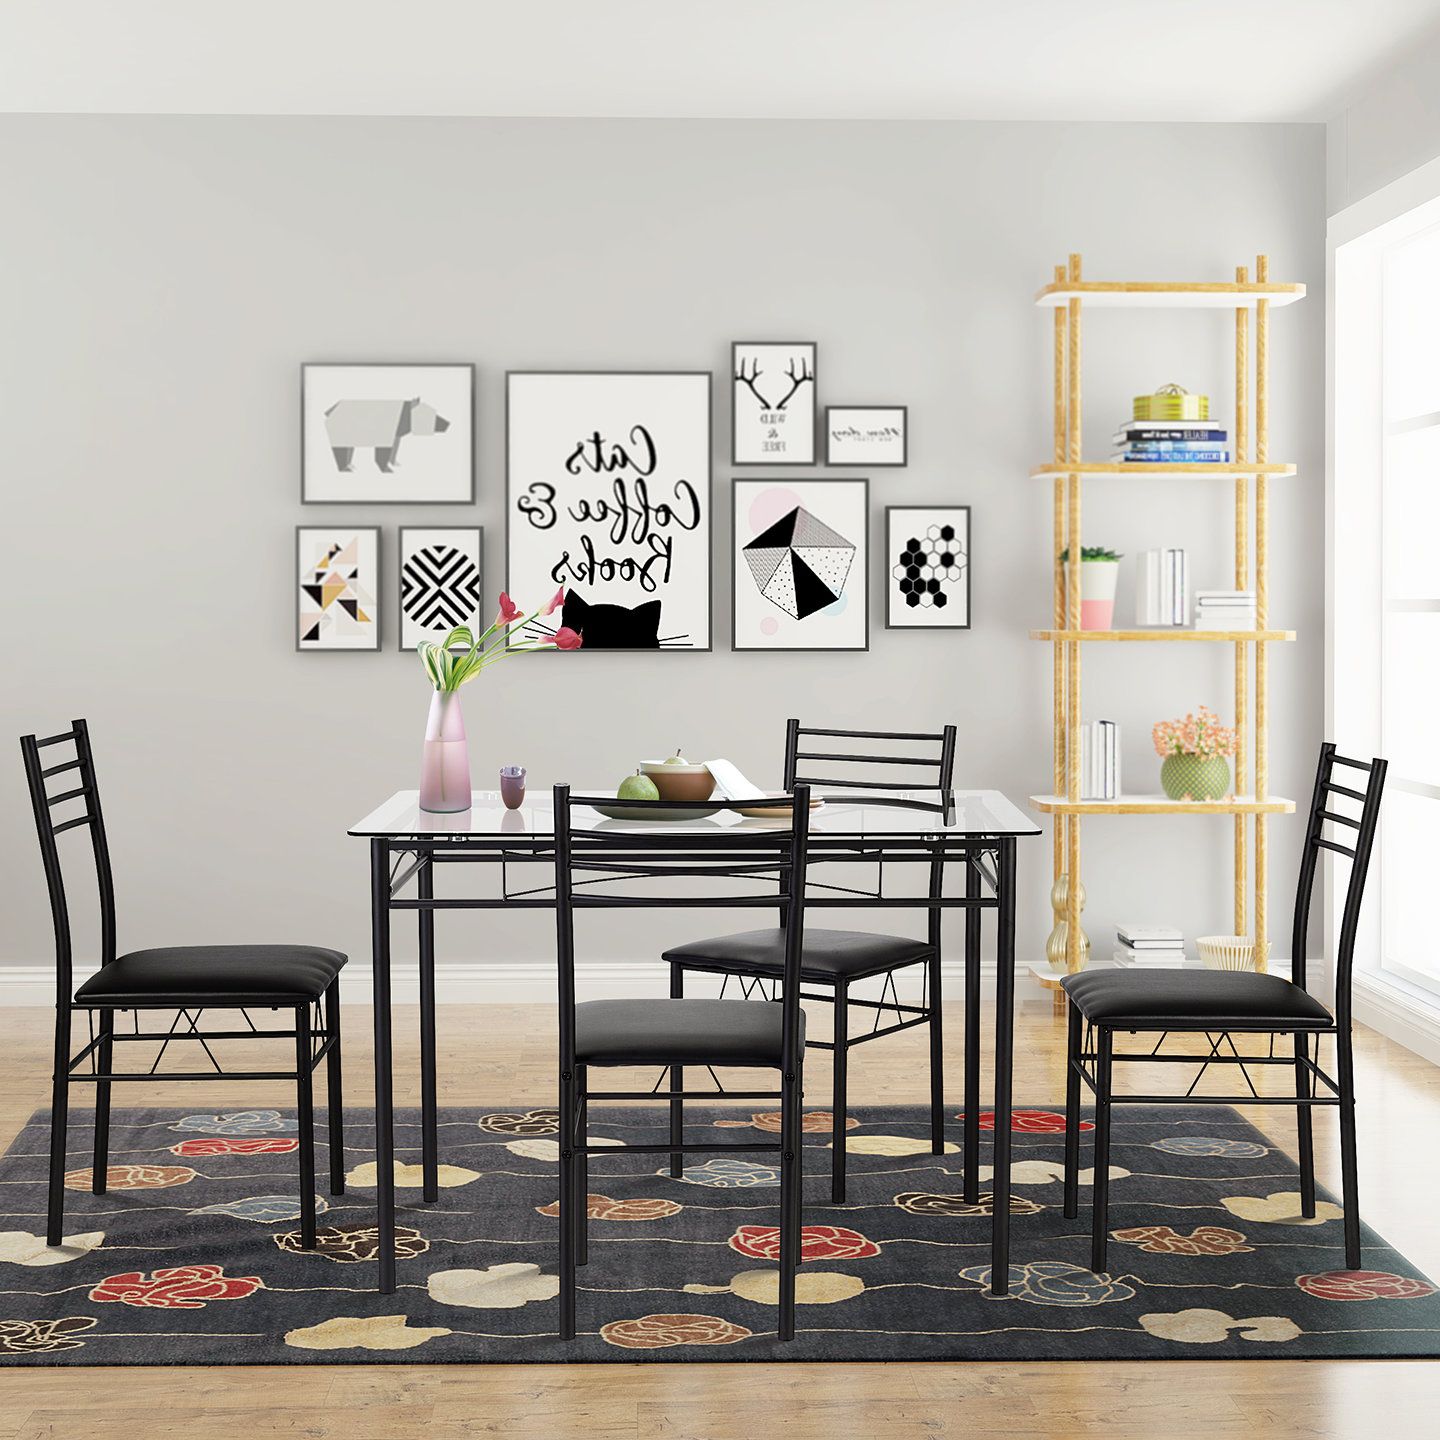 Taulbee 5 Piece Dining Sets For Newest Taulbee 5 Piece Dining Set (View 1 of 20)